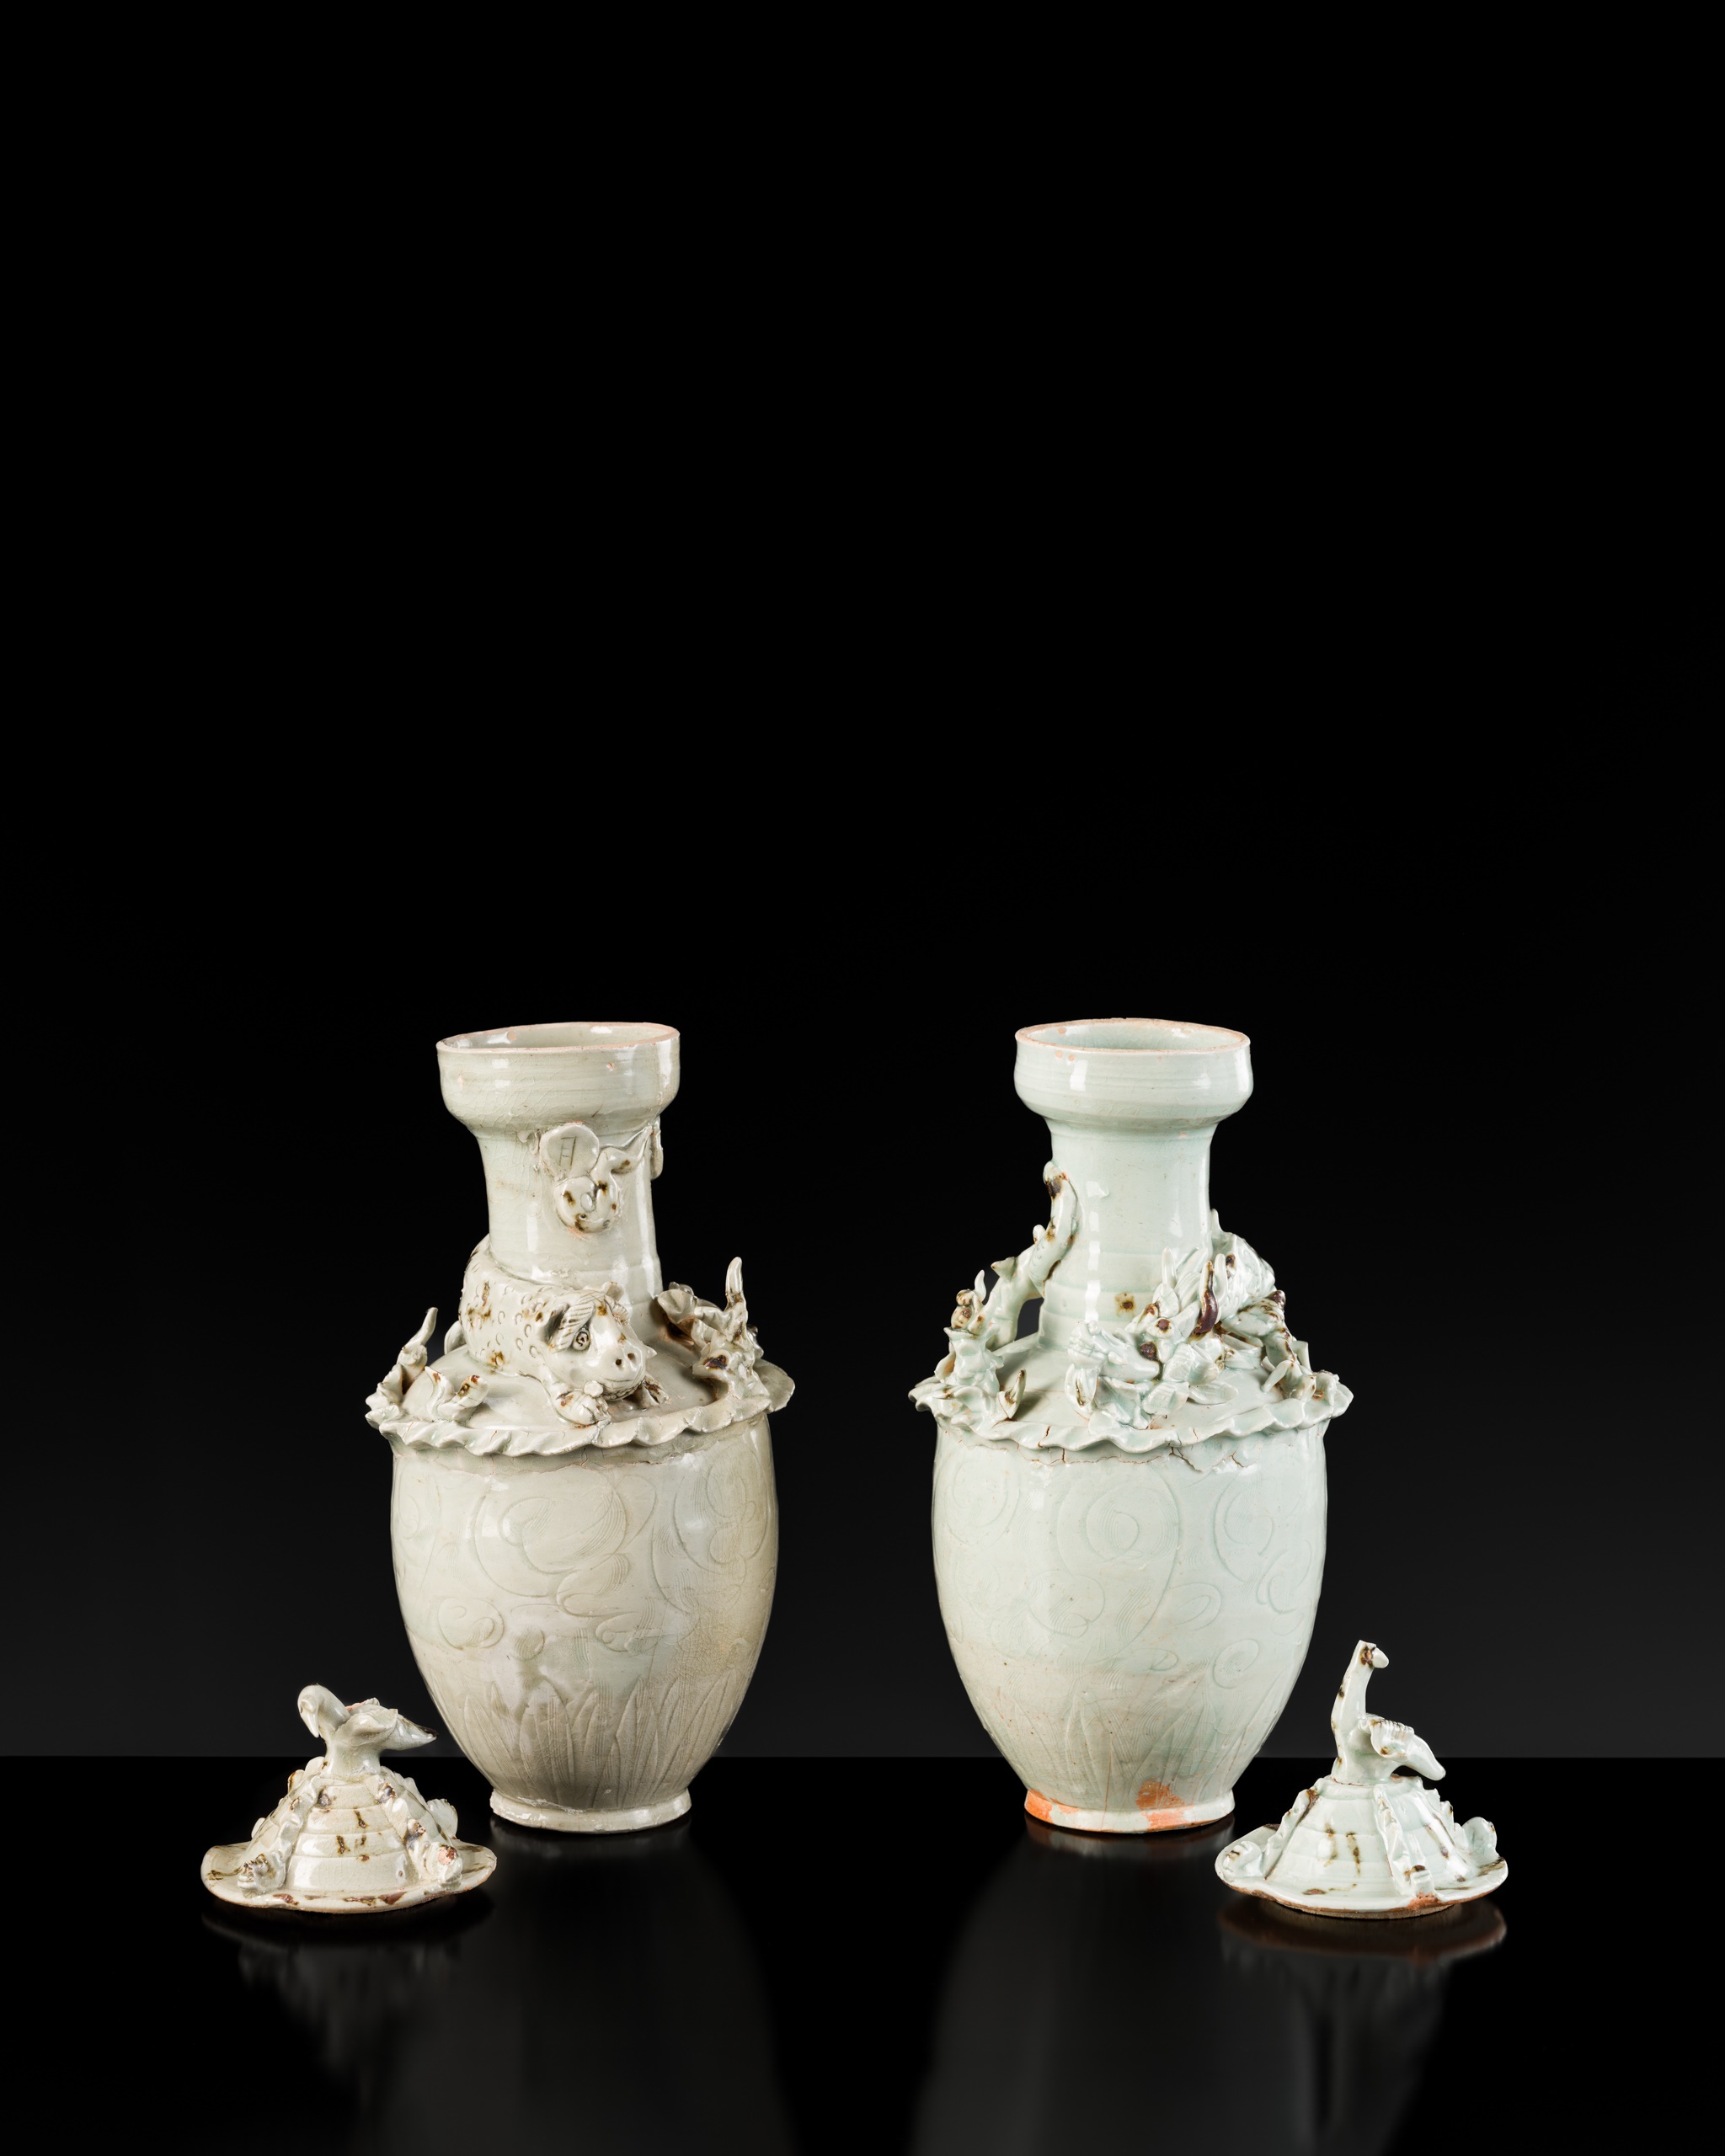 A PAIR OF QINGBAI FUNERARY JARS AND COVERS, SONG DYNASTY - Image 7 of 12